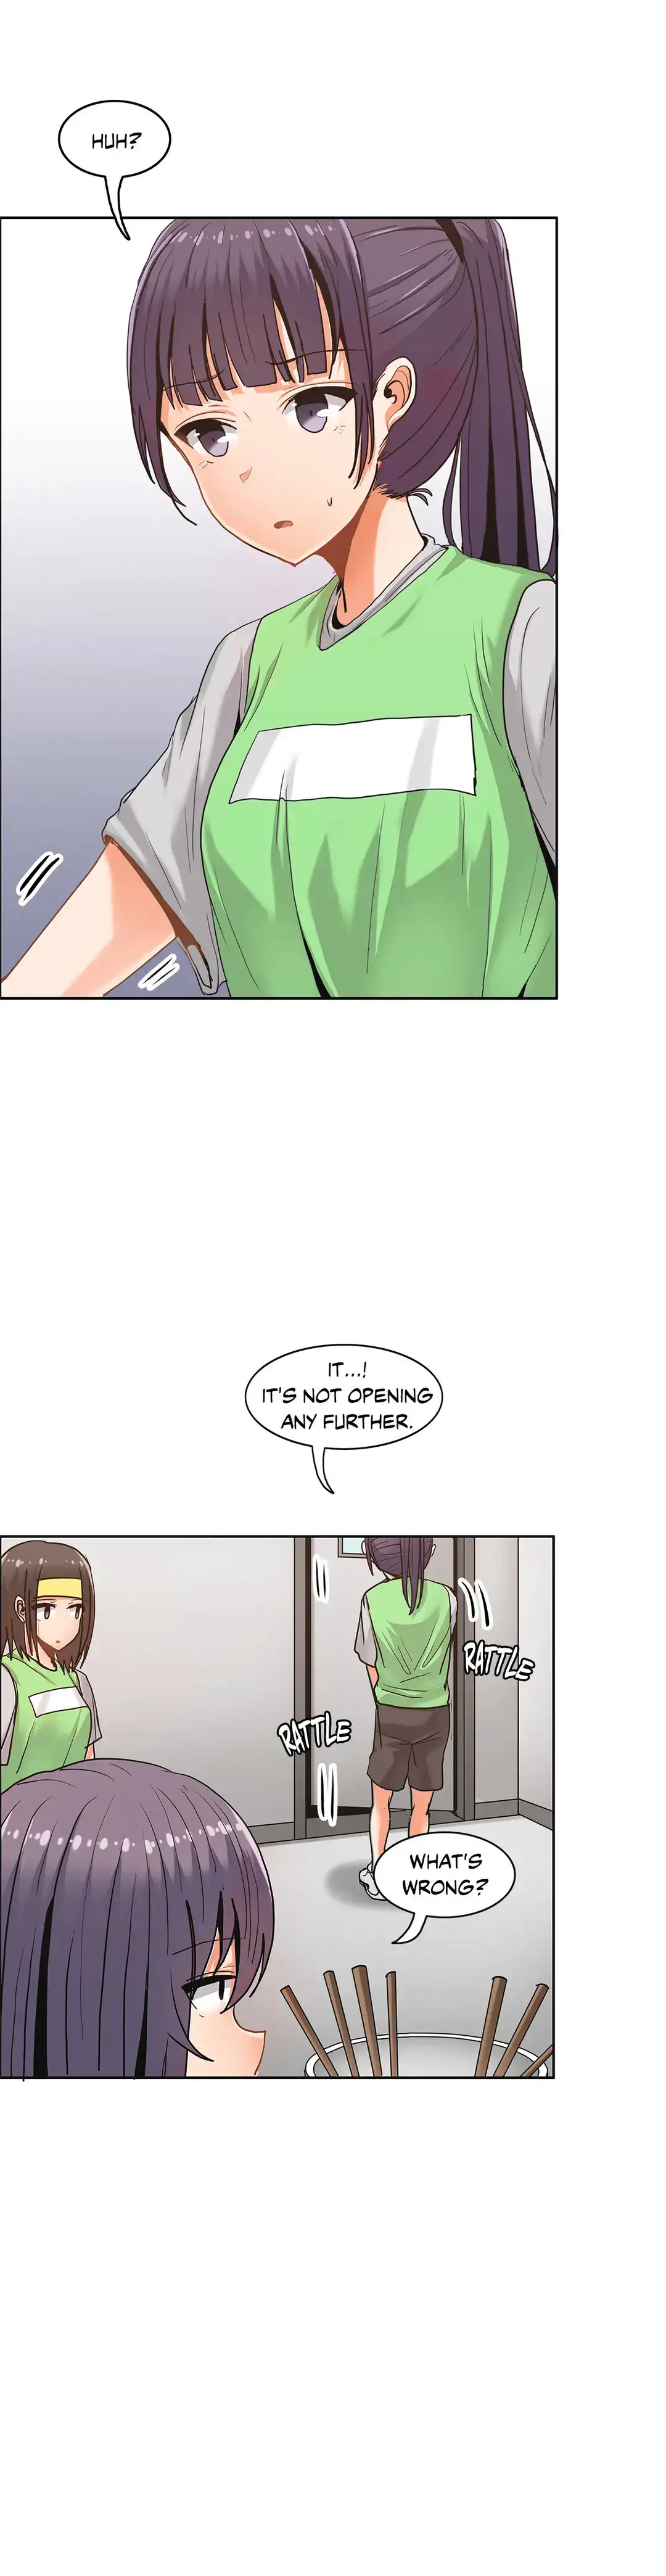 The Girl That Wet the Wall - Chapter 22 Page 4